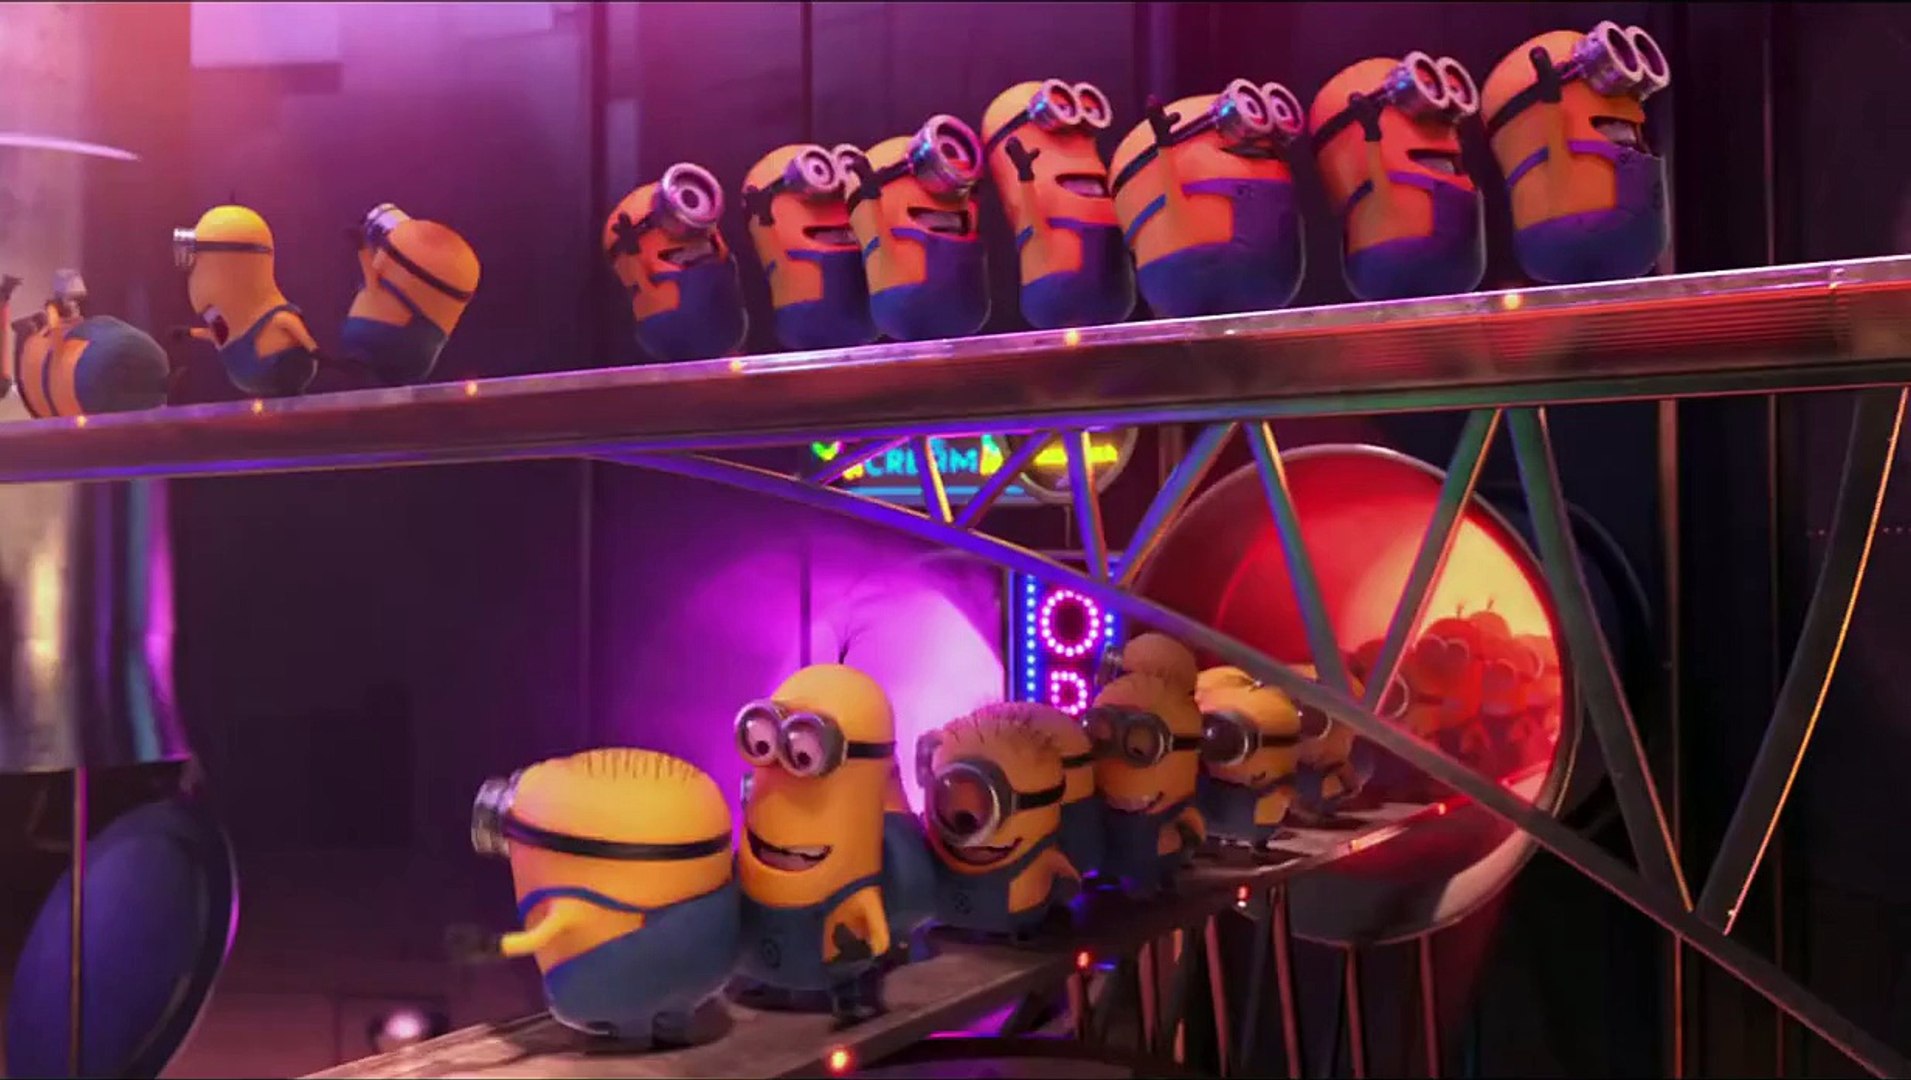 The Minions Song, Despicable Me 2